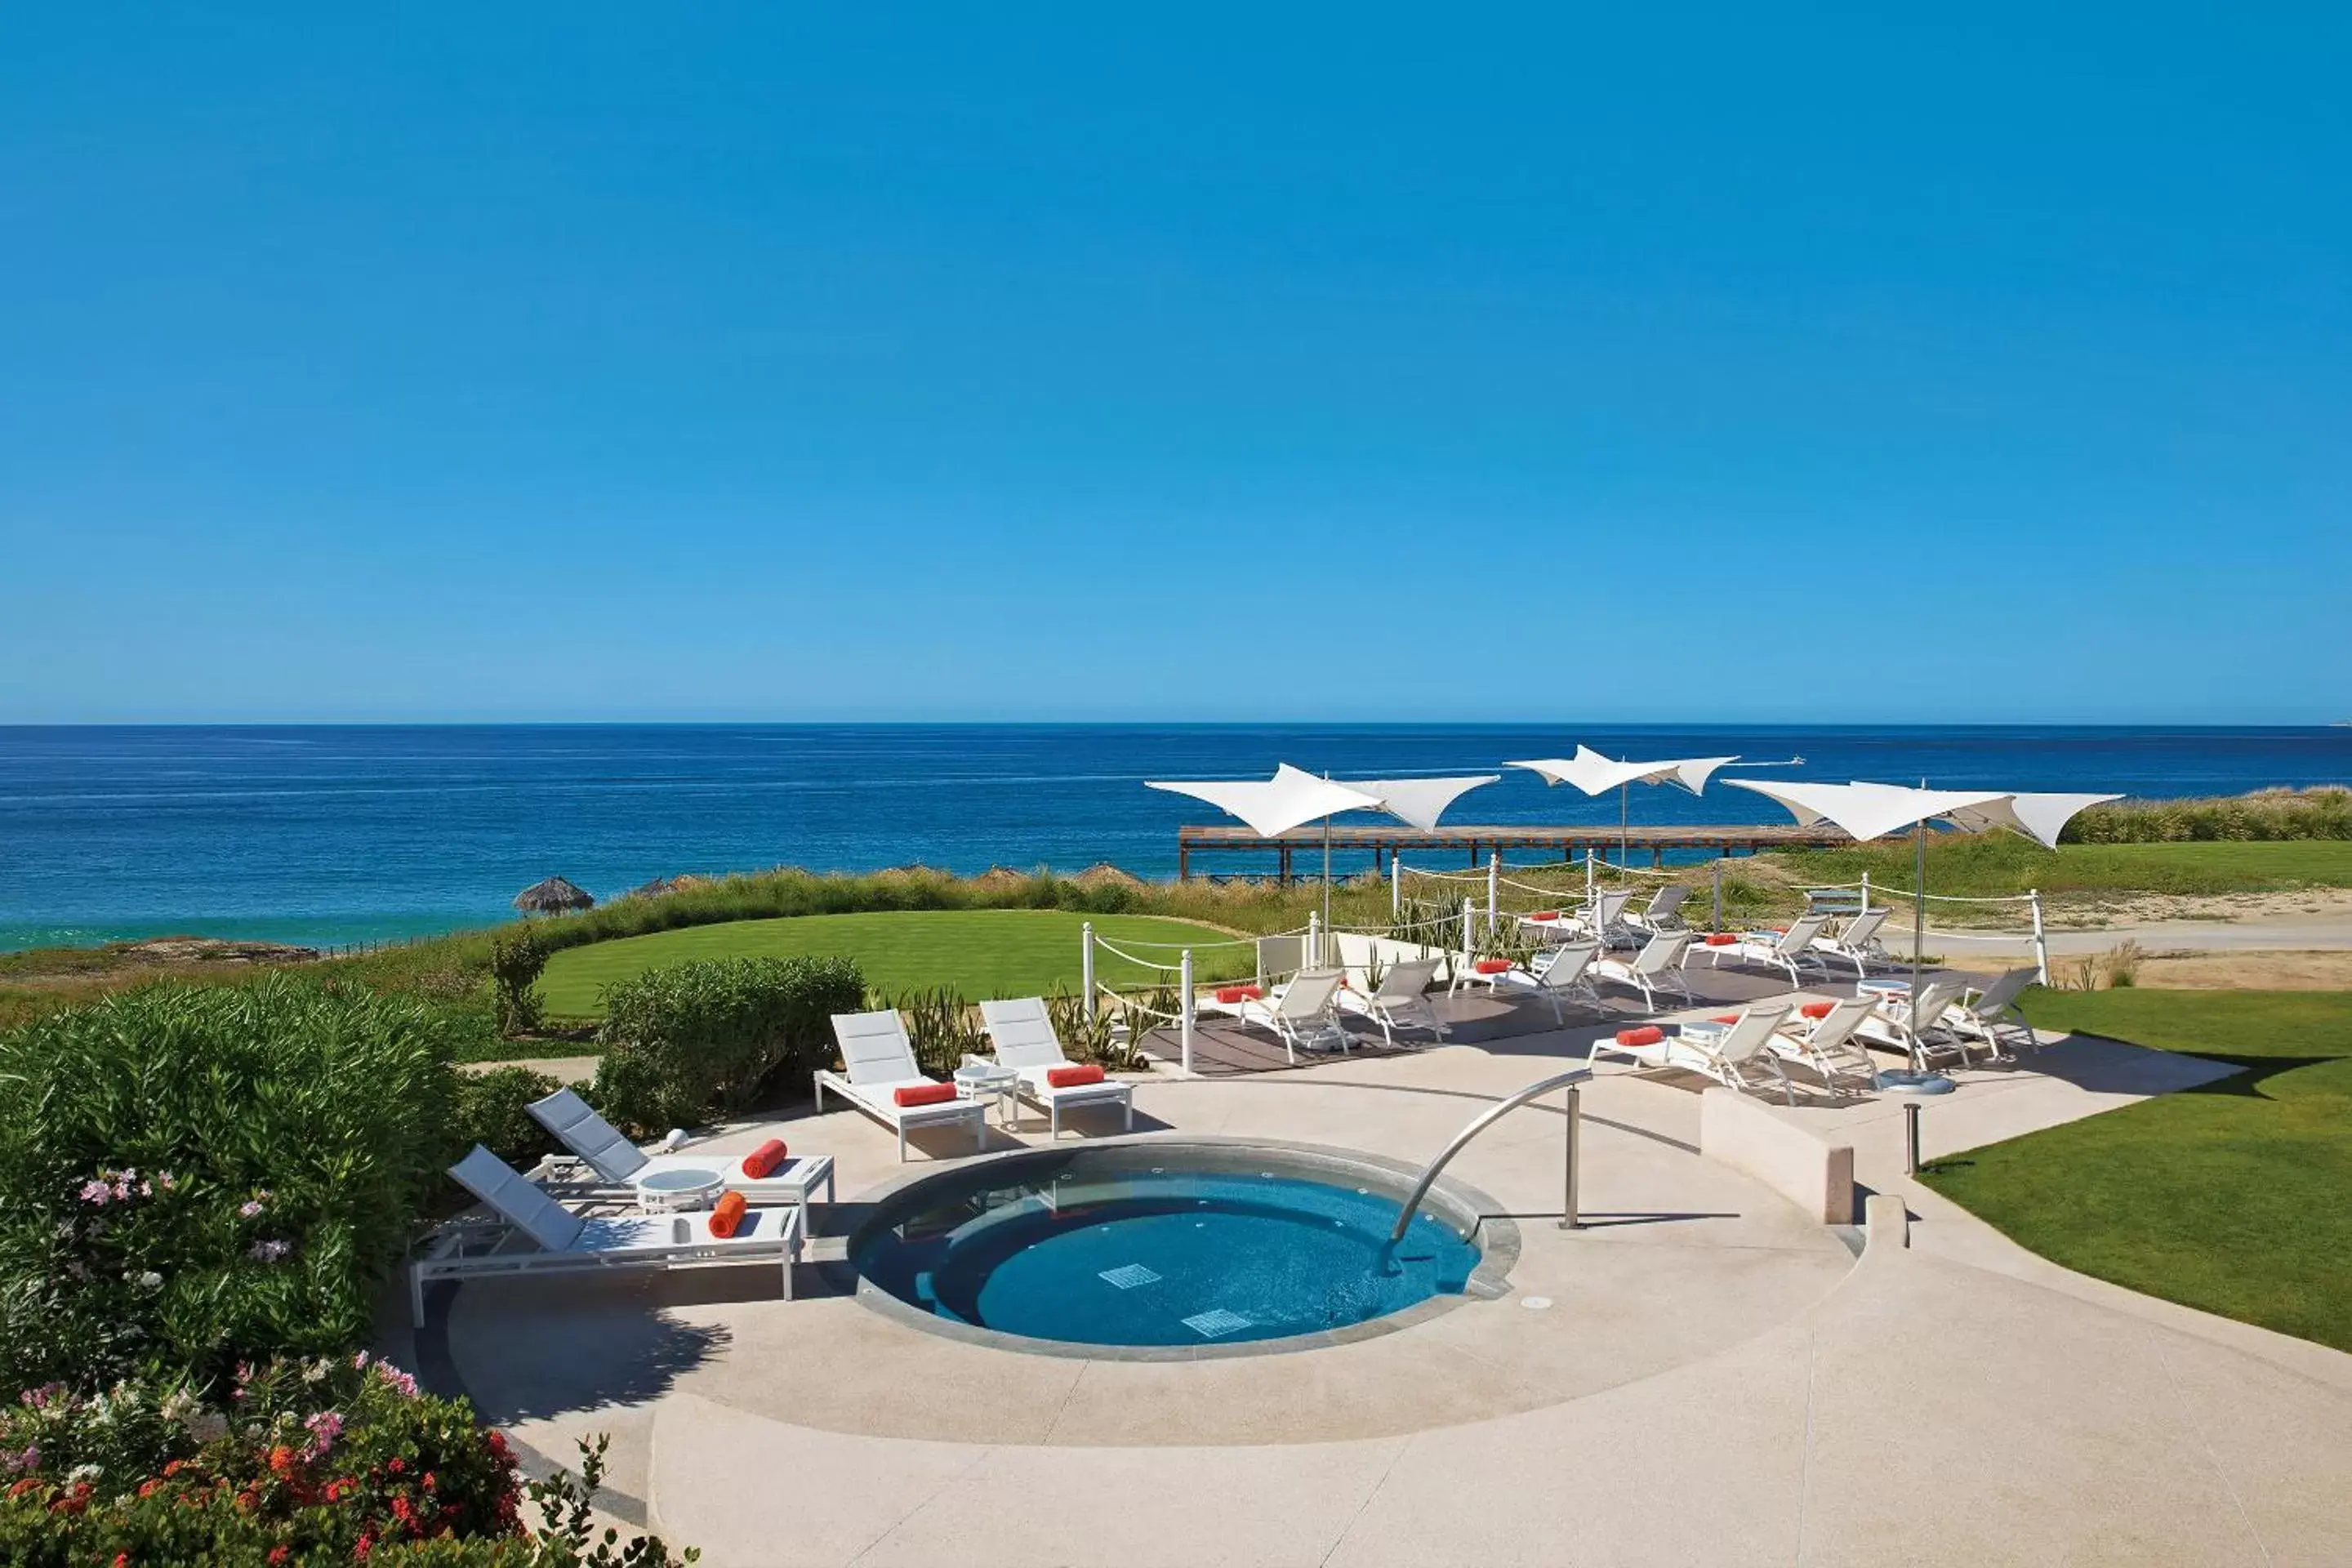 Swimming pool, Pool View in Secrets Puerto Los Cabos Golf & Spa18+